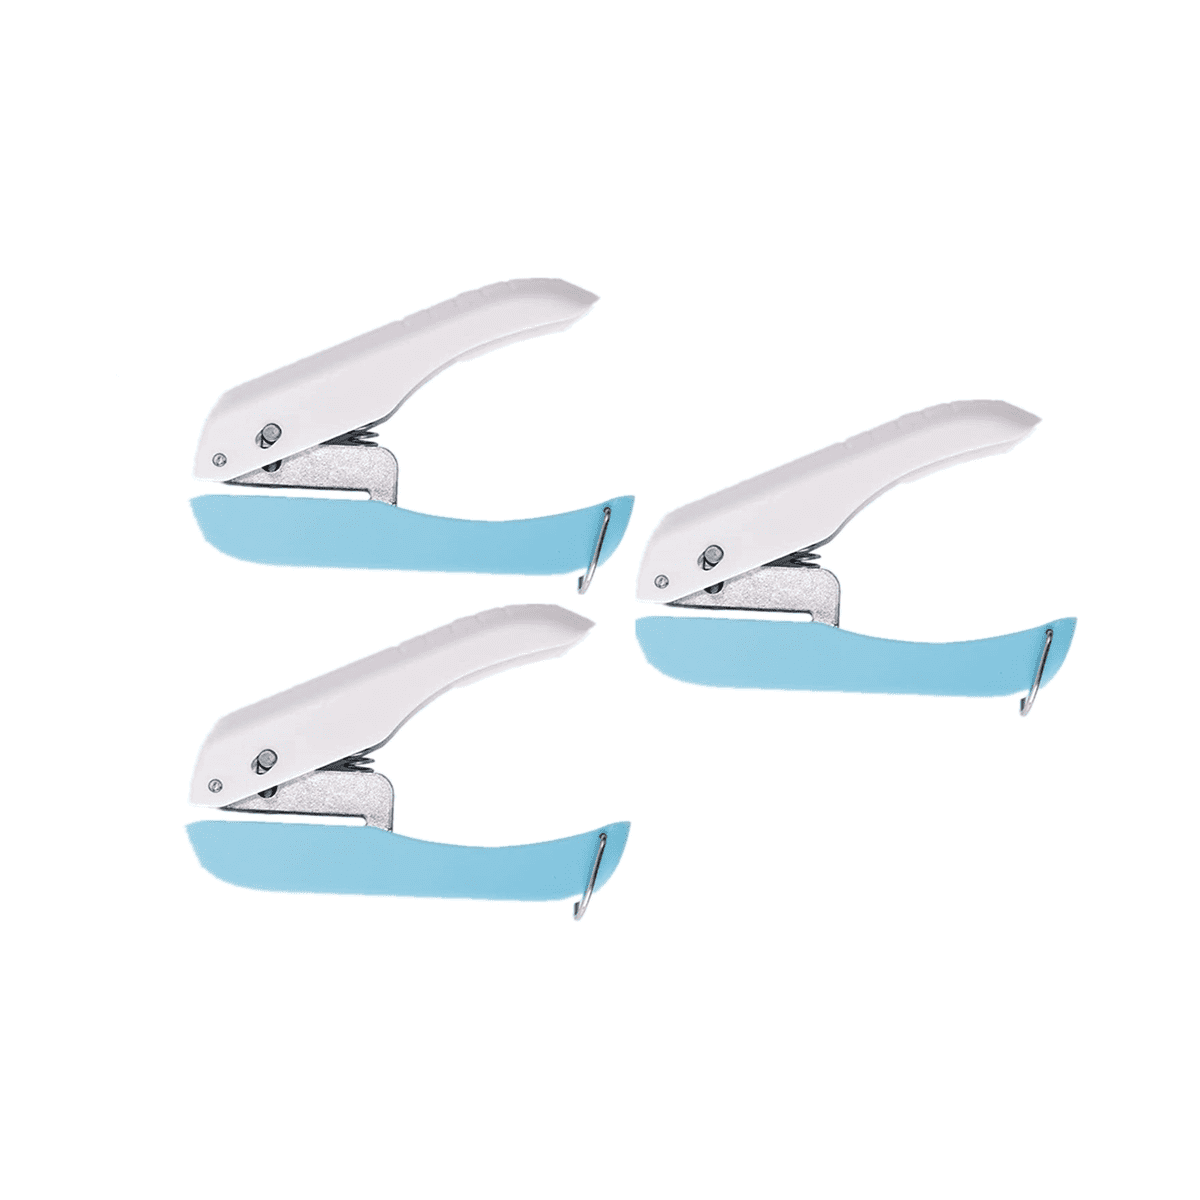 Winyuyby 3PCS Paper Hole Punch Shapes, Single Hole Puncher for  Crafts,Handheld Circle/Star/Heart Hole Punch for Tags 